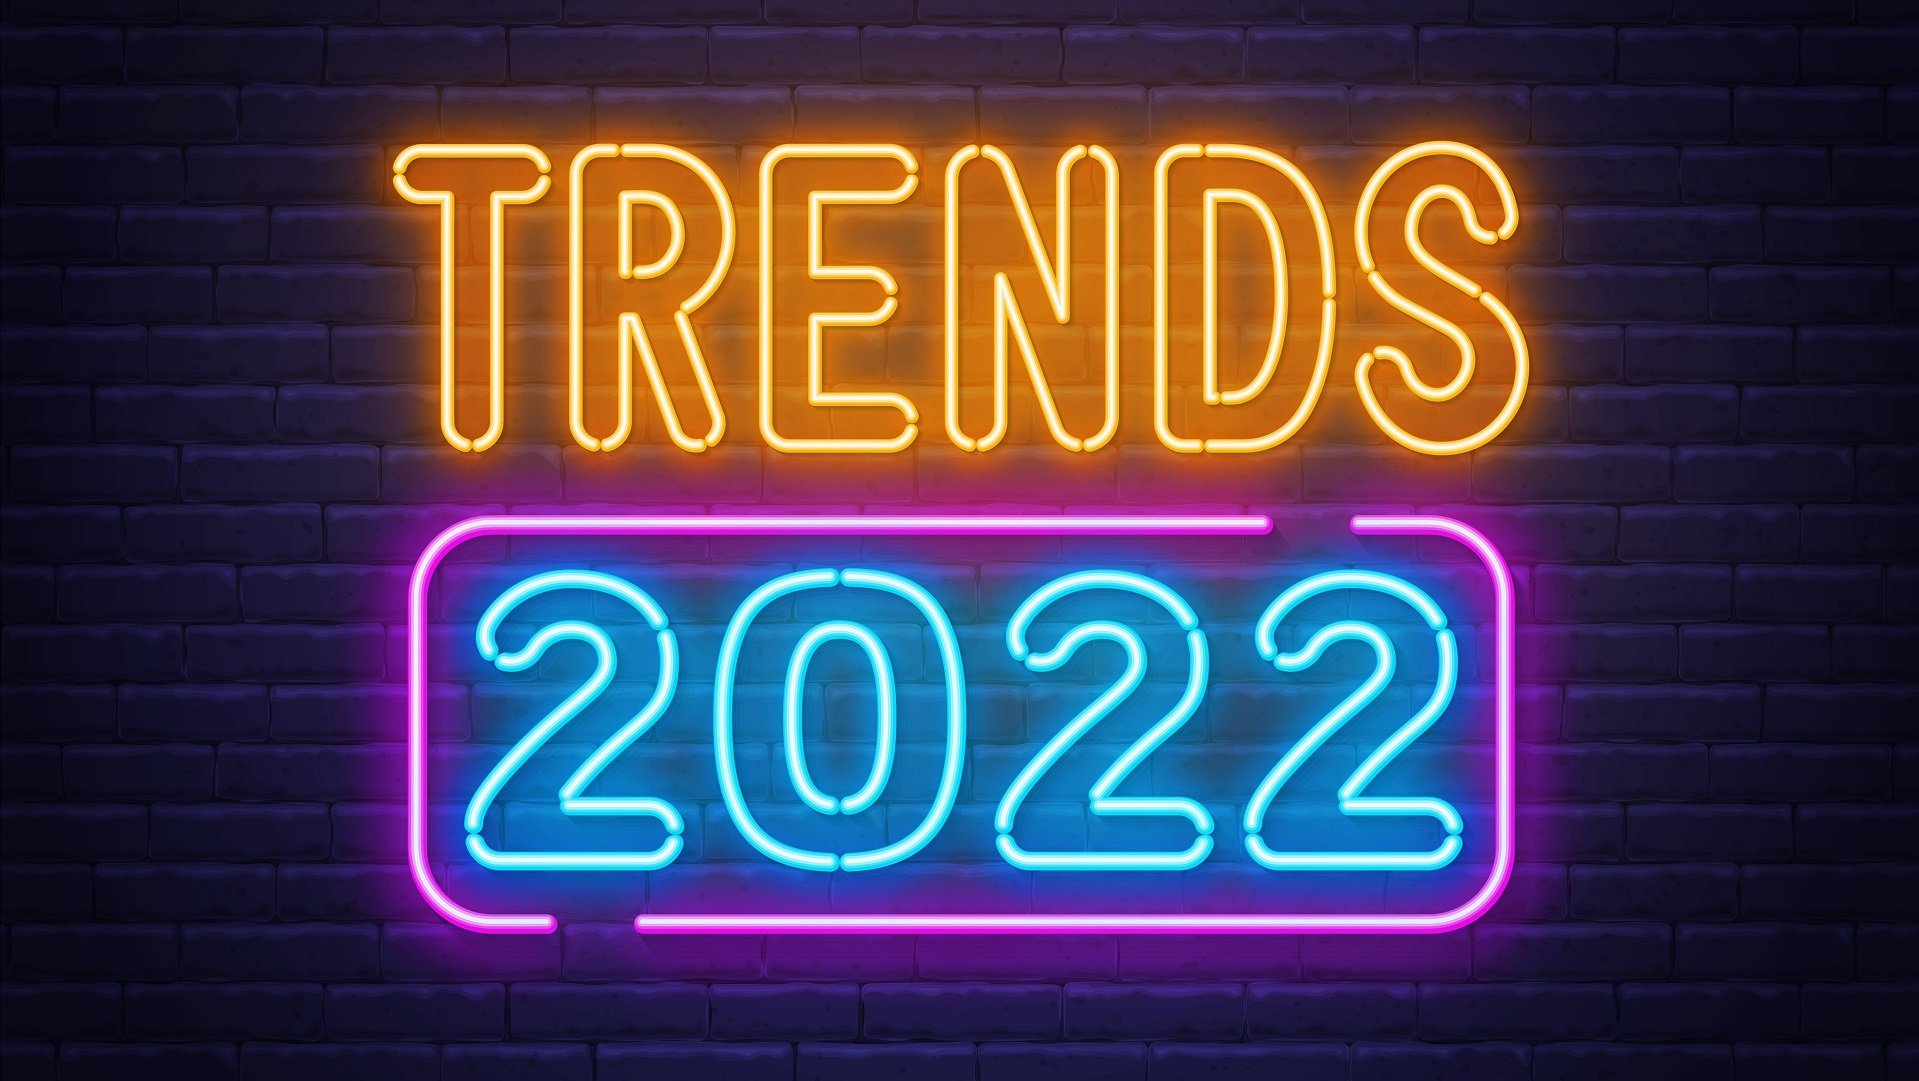 Datassential’s Jack Li and Mike Kostyo share a sneak peek of our 2022 Annual Trends Report, highlight 